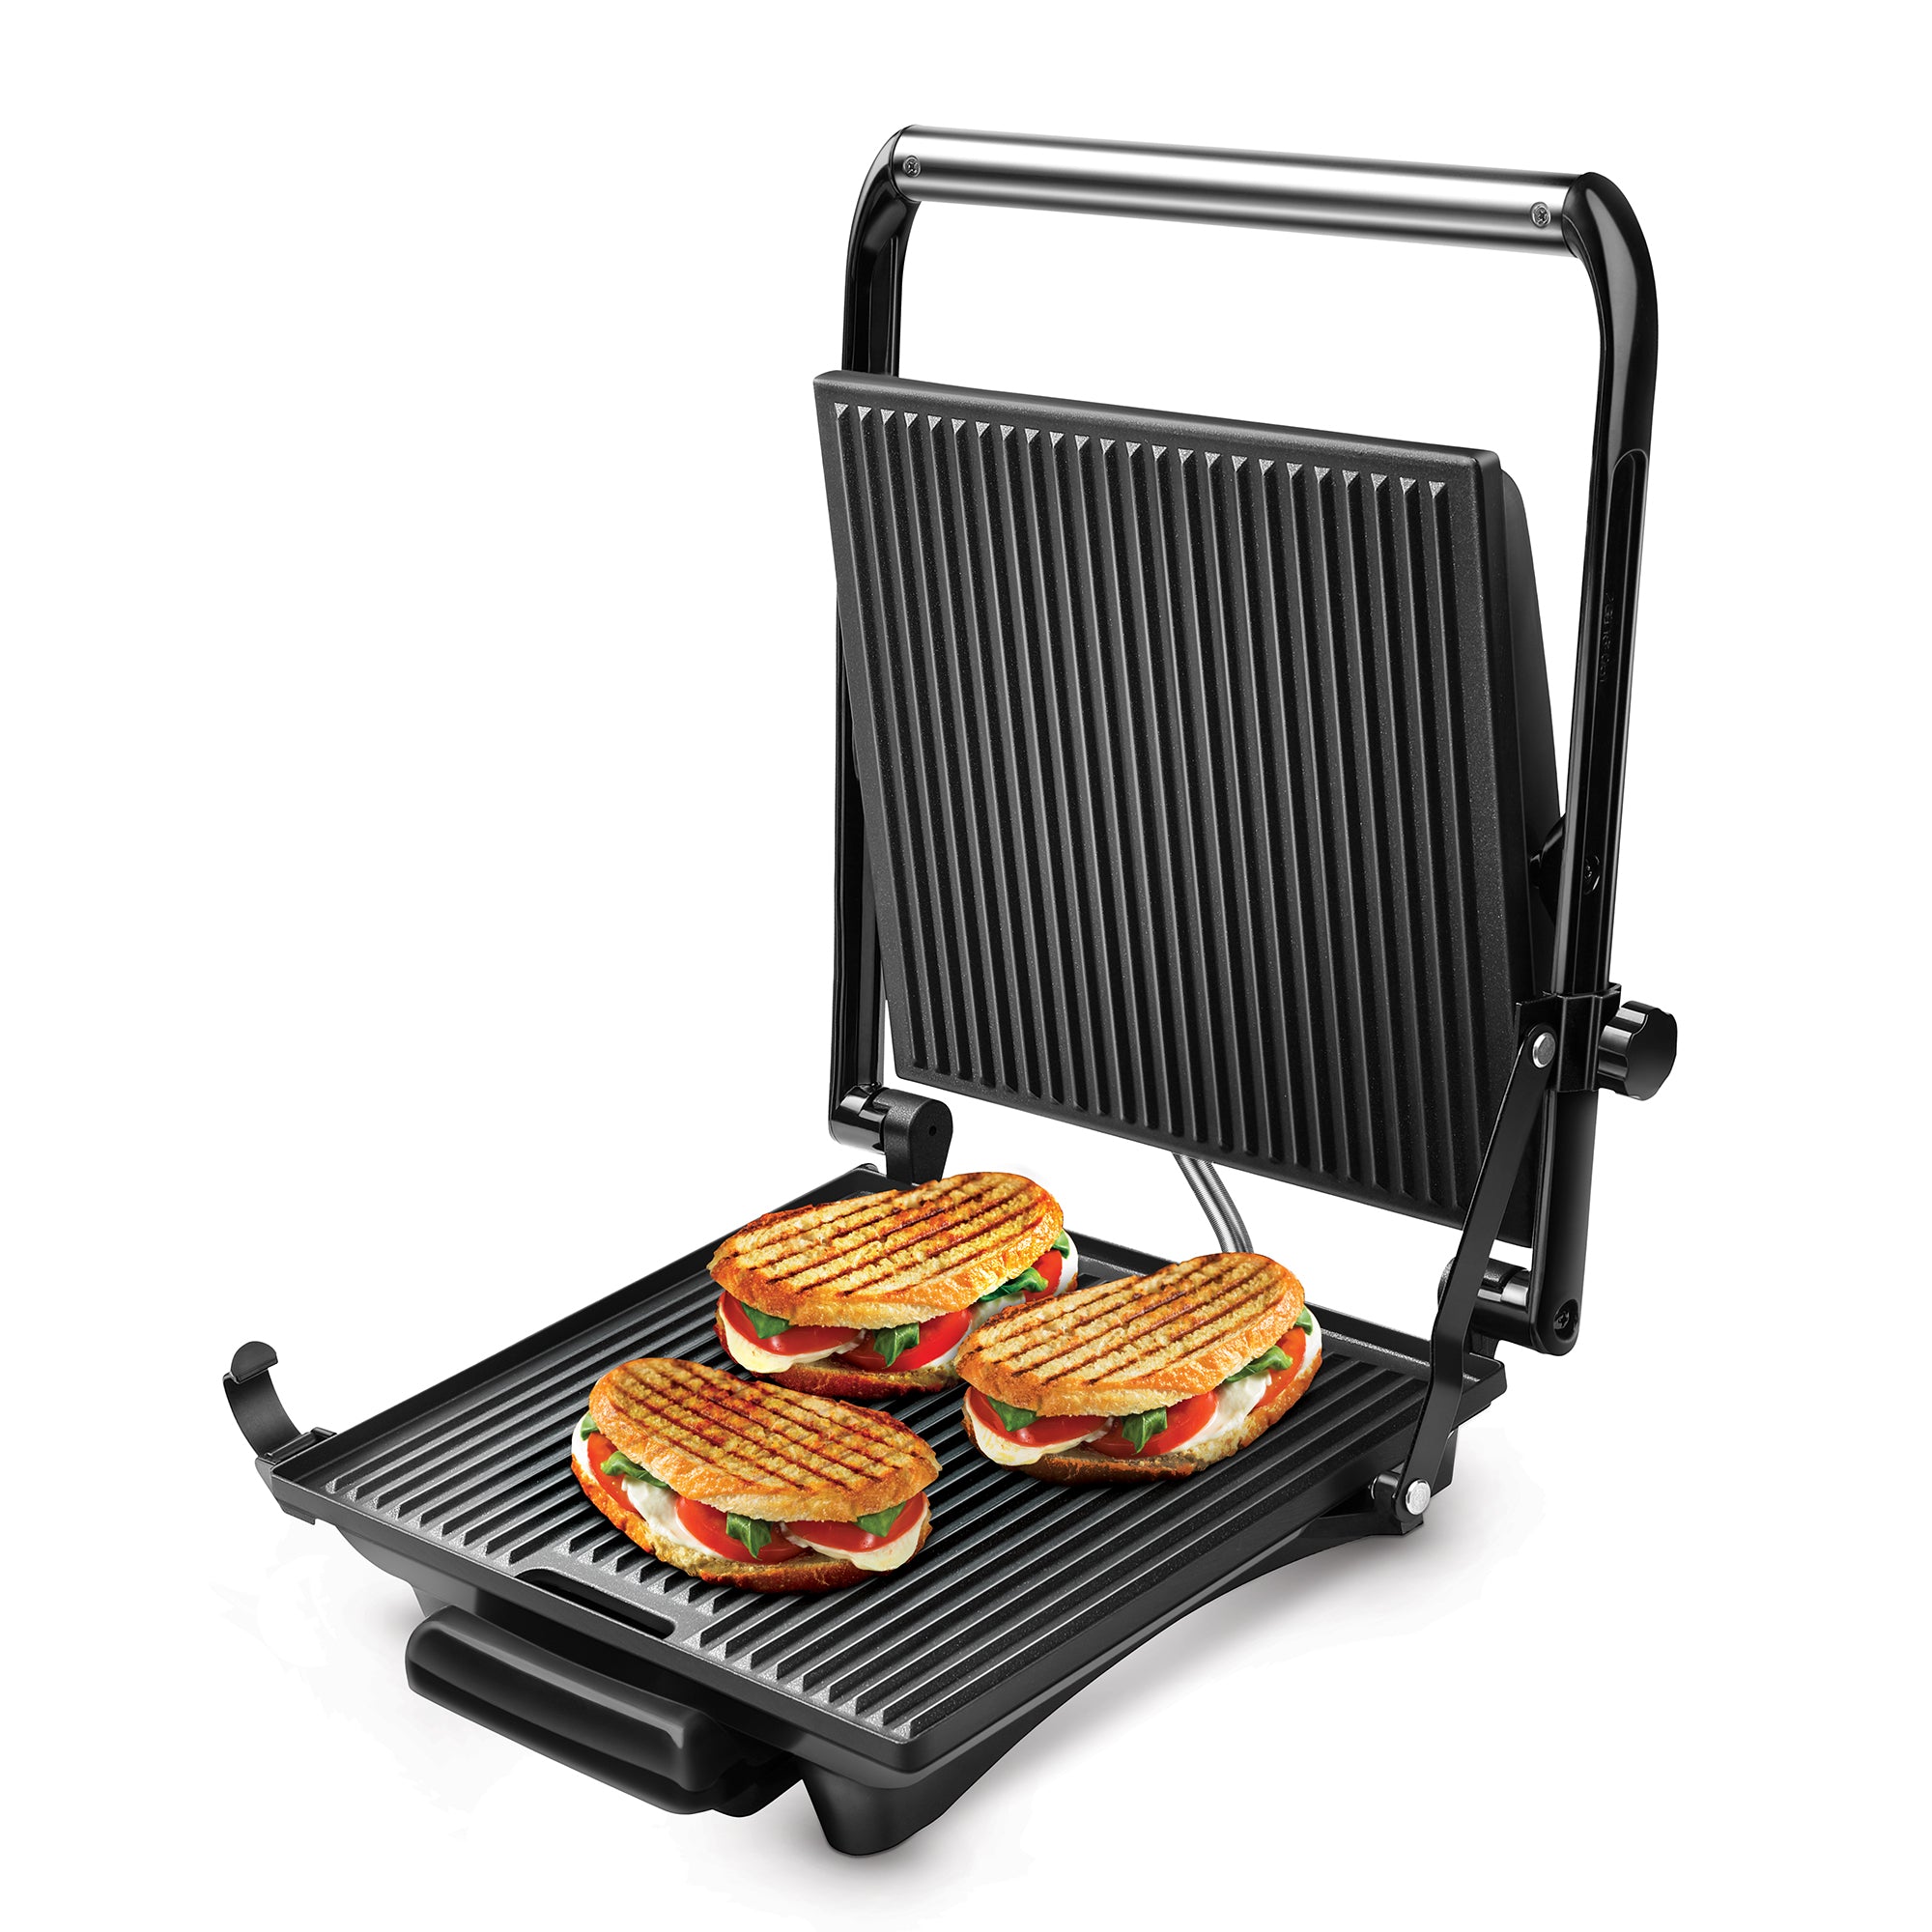 Warmex Home Appliances Grill Master with 90° Rotation warmexhomeappliances2